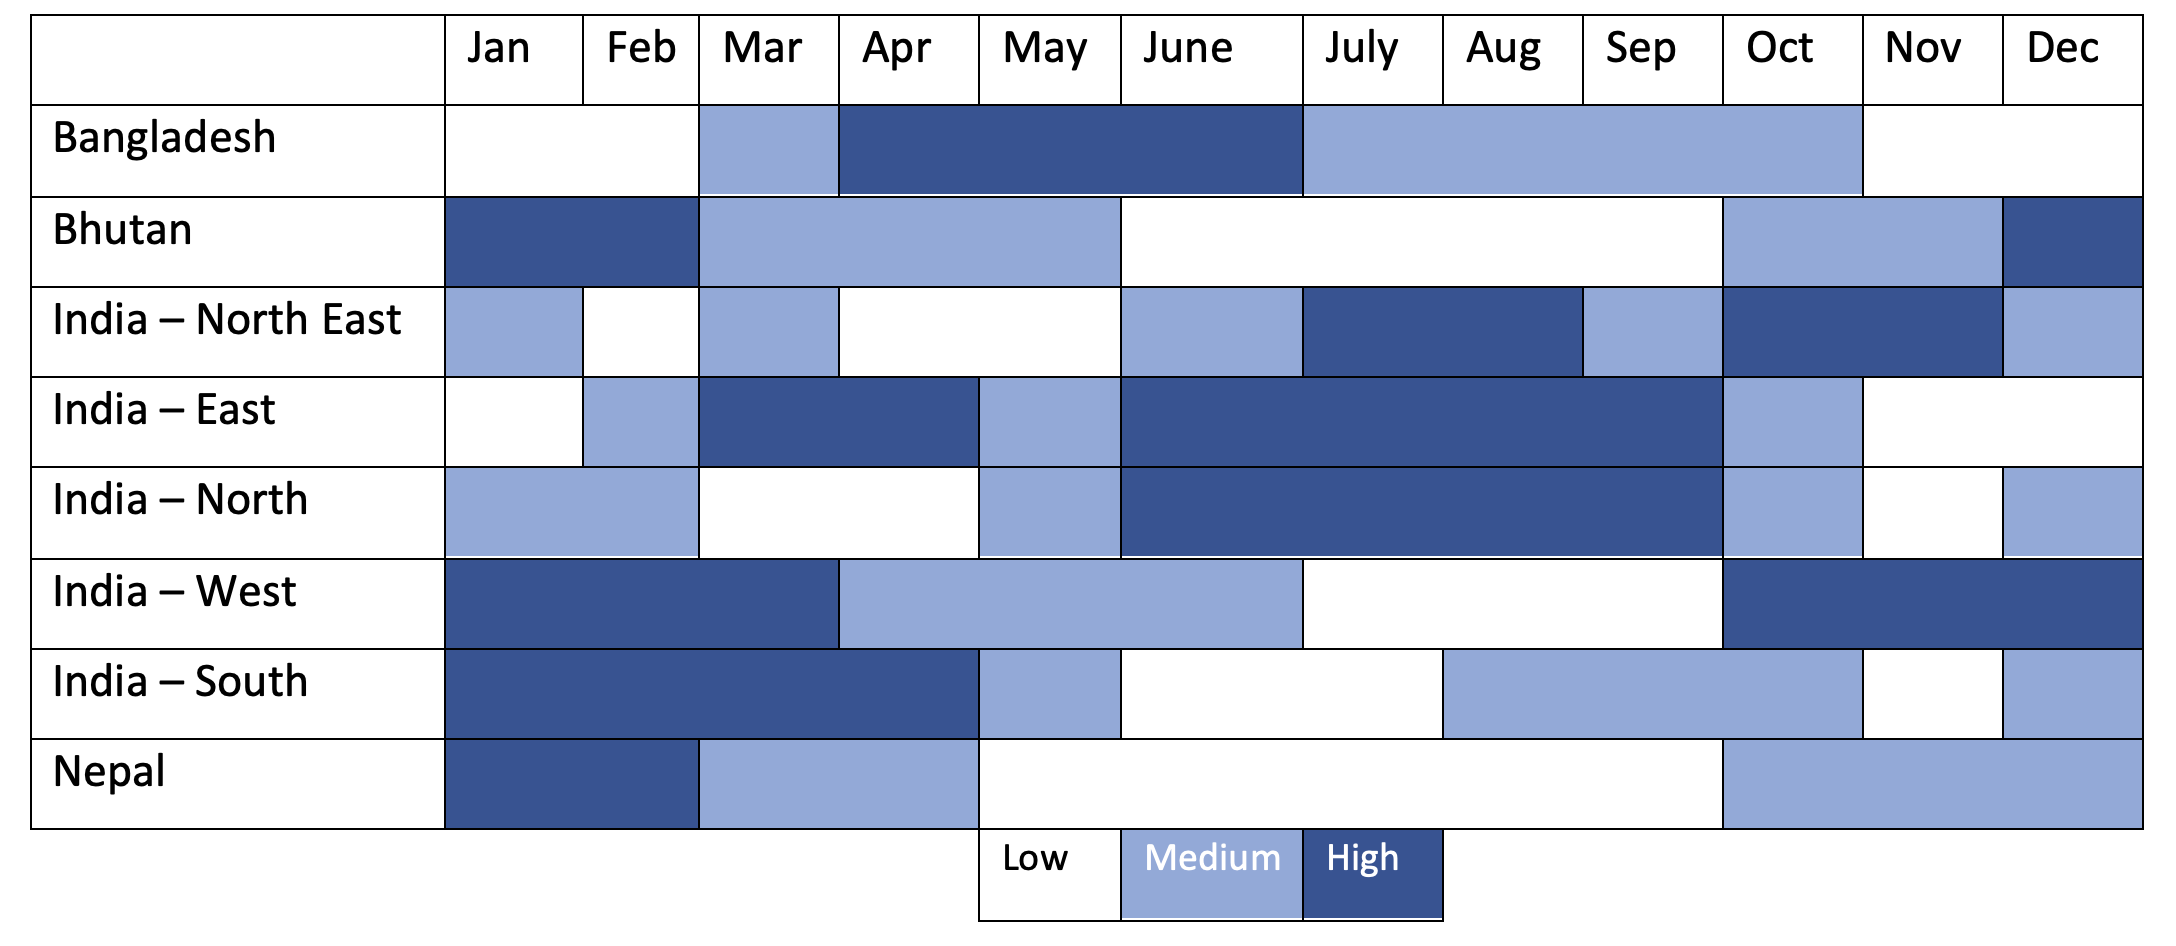 Table of monthly demand pattern in BBIN countries